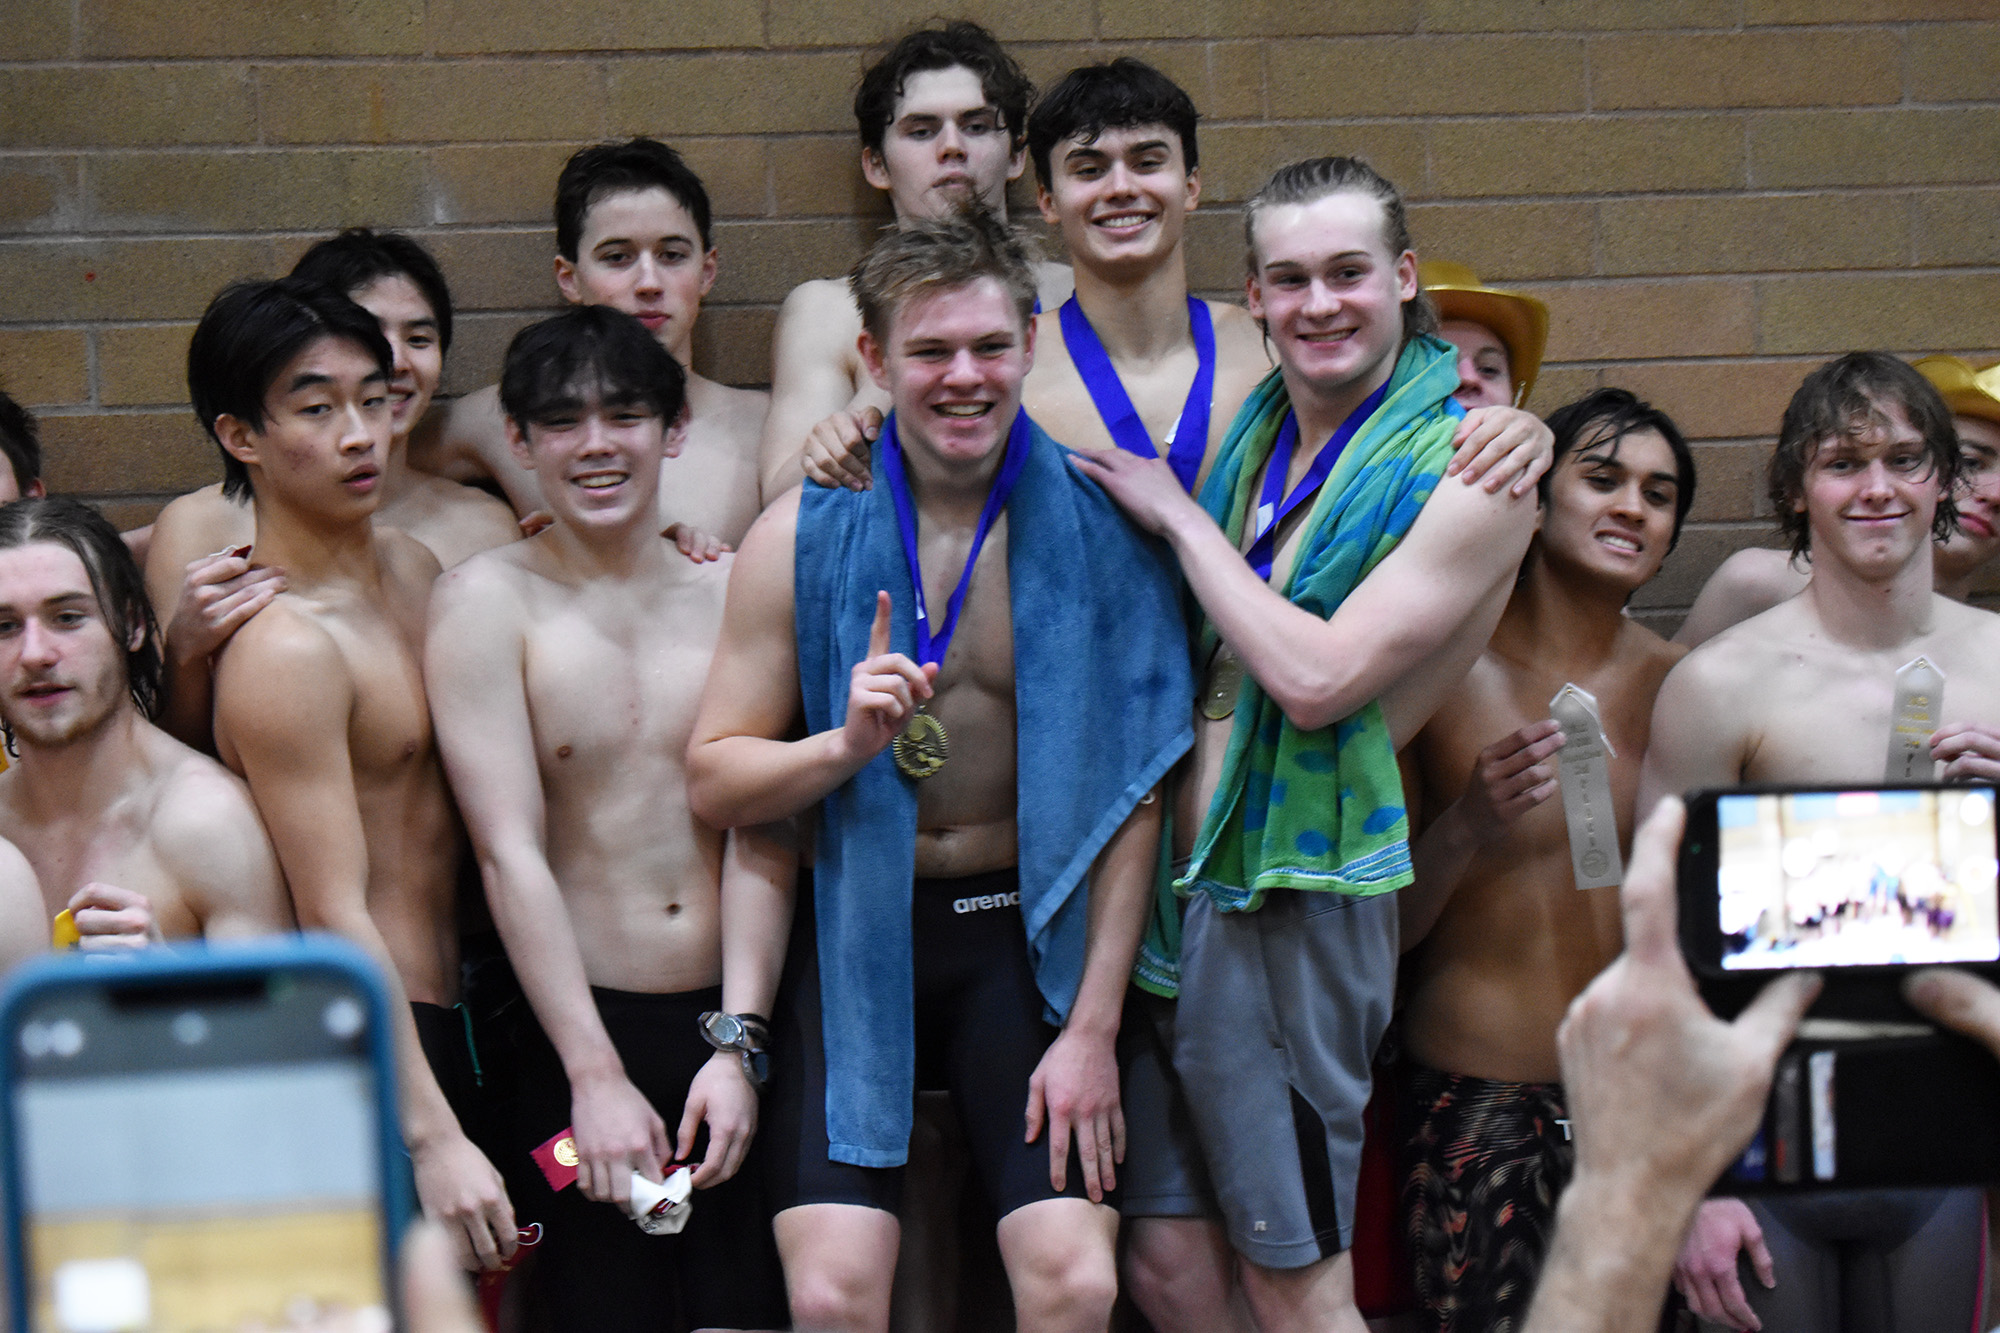 Union's 400 free relay team of Alexander Wahlman, Owen Robertson, Steven Empey and Sam Empey stand on the podium after taking first place at the 4A District 4-8 meet at Kelso High School on Saturday, Feb. 4, 2023.